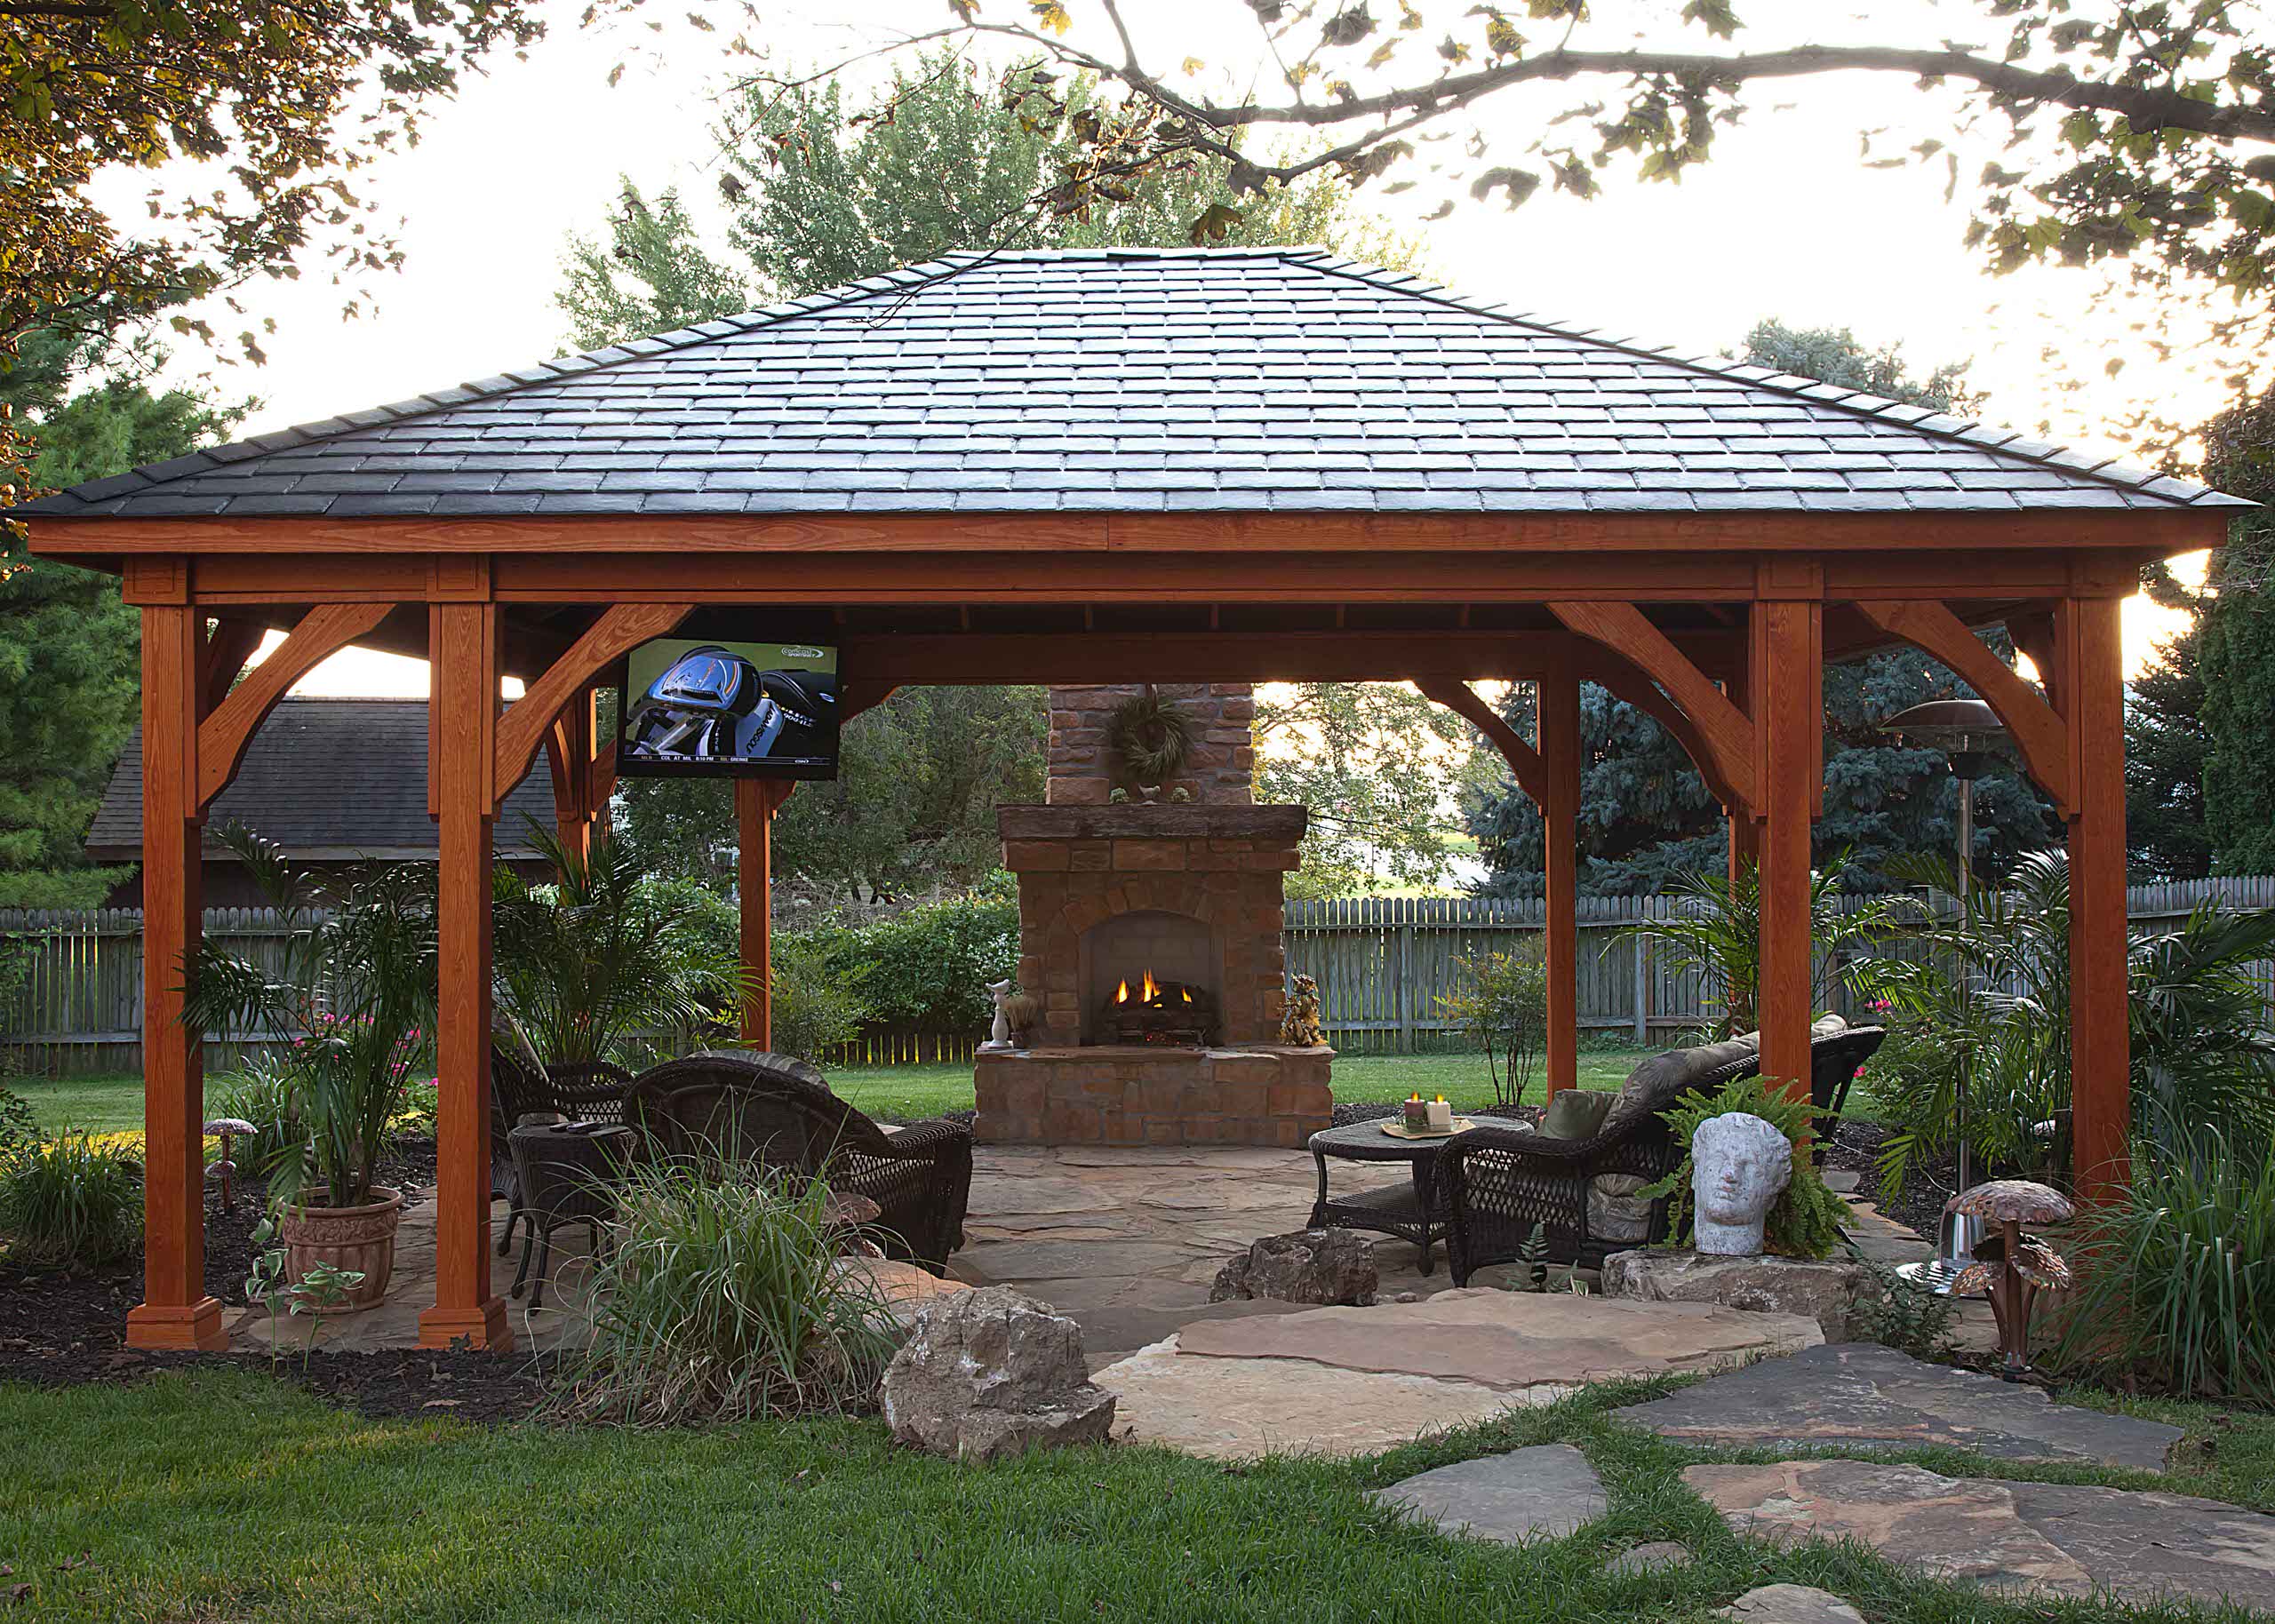 Outdoor With A Fire Pit And Gazebo, Gazebo With Fire Pit Inside